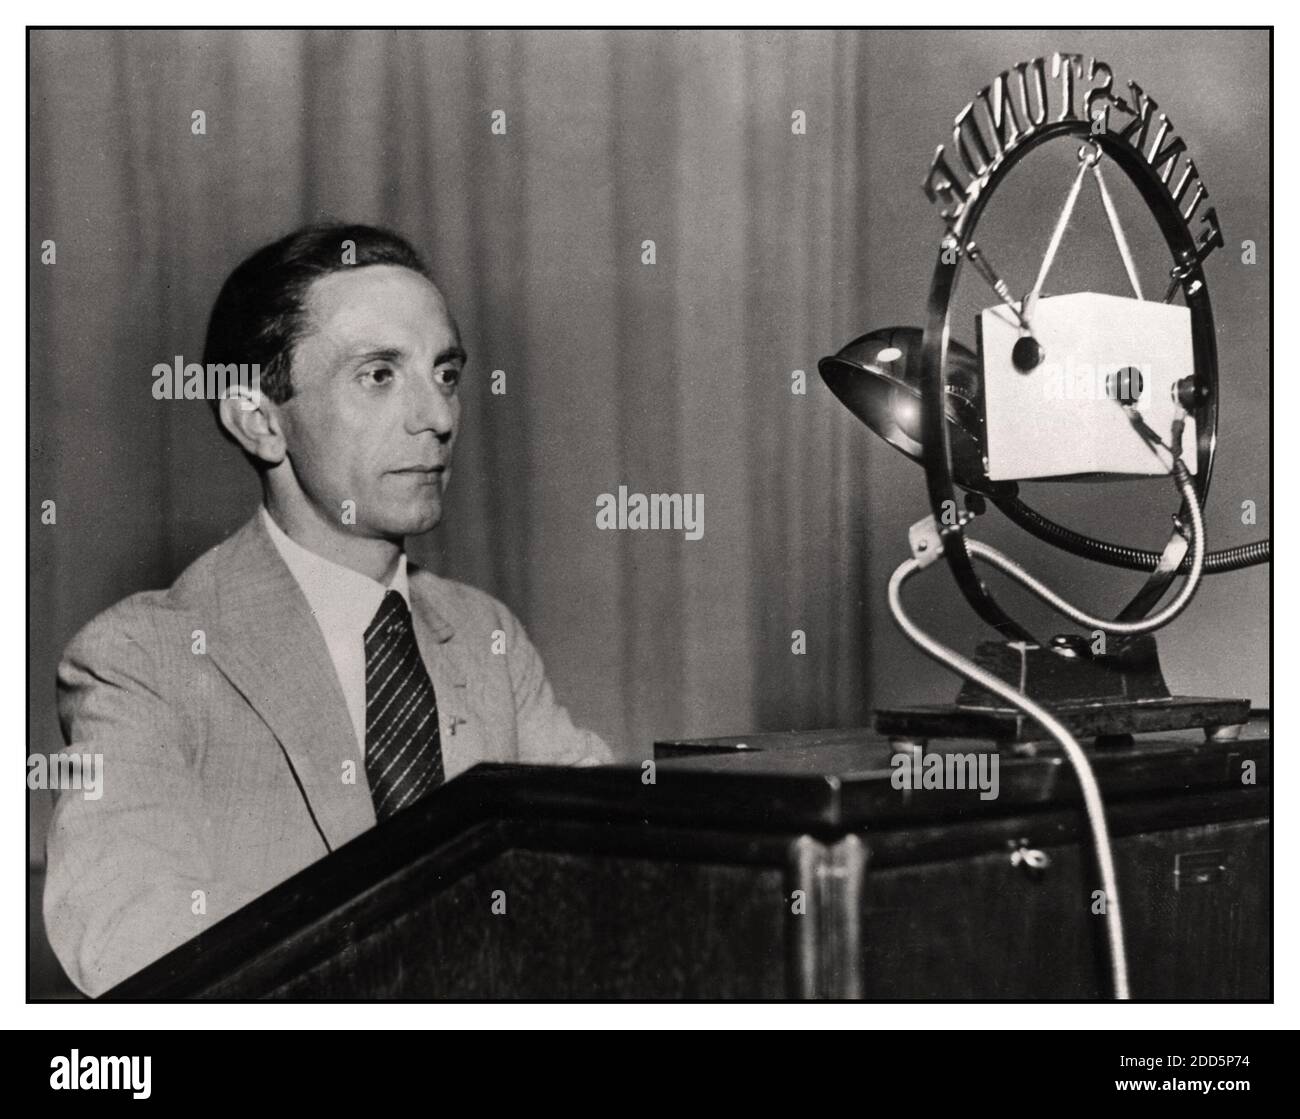 GOEBBELS RADIO BROADCAST 1930's Nazi NSDAP Propaganda Minister Joseph Goebbels with microphone addresses  the German nation by radio broadcast transmission. Goebbels realised that he and Führer Adolf Hitler could reach a wide audience through the medium of radio broadcast “Ganz Deutschland hört den Führer mit dem Volksempfänger”“ All over Germany hear the Führer with the people's radio receiver”   The Volksempfänger, an affordable and extremely popular German radio, was introduced in 1933, the year Adolf Hitler was appointed chancellor of Nazi Germany. Stock Photo